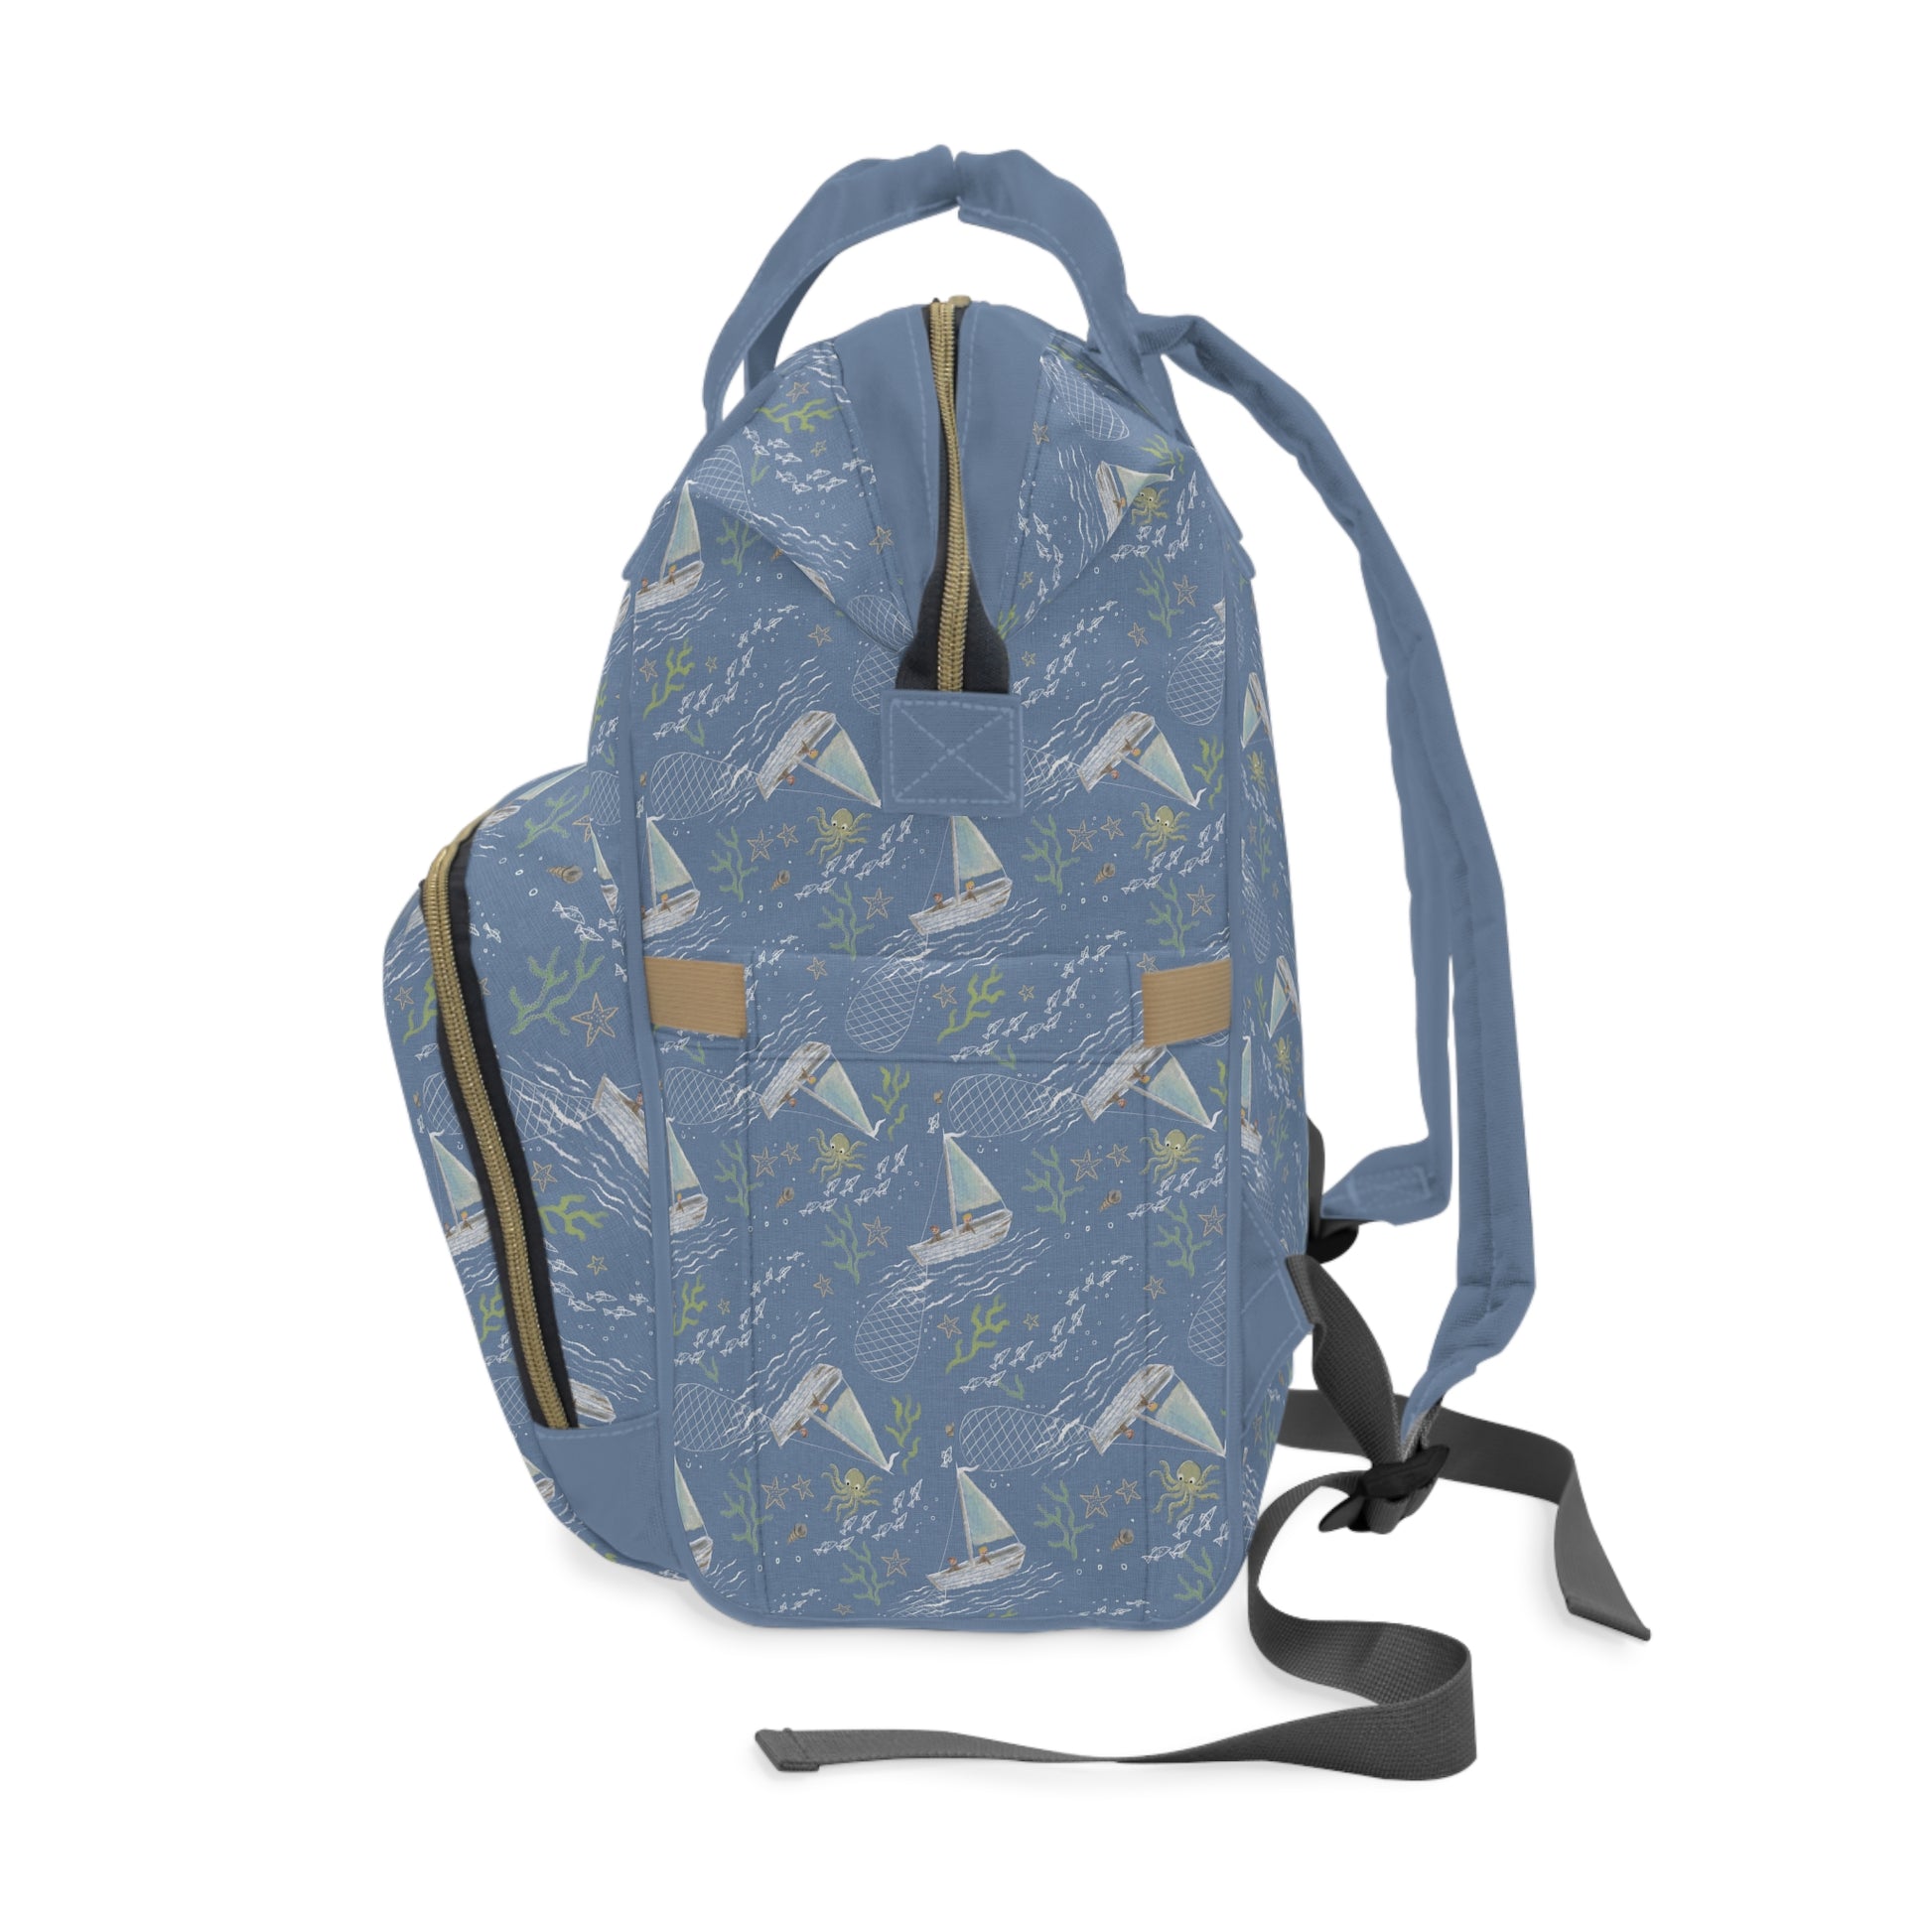 Blue fishing-themed baby bag for parents on the go